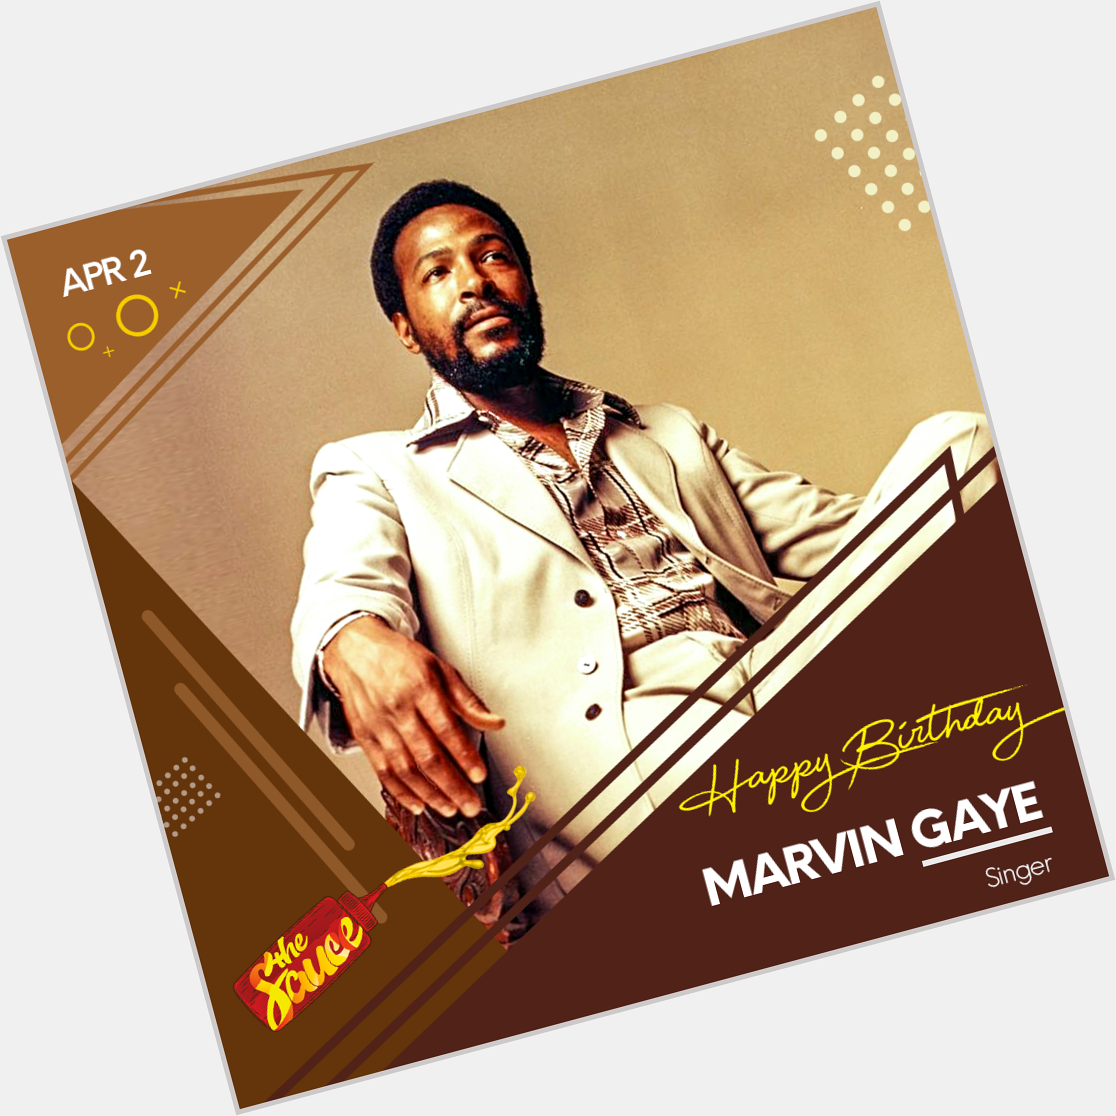 Happy birthday to the late American singer and producer Marvin Gaye, he would be turning 80 today 